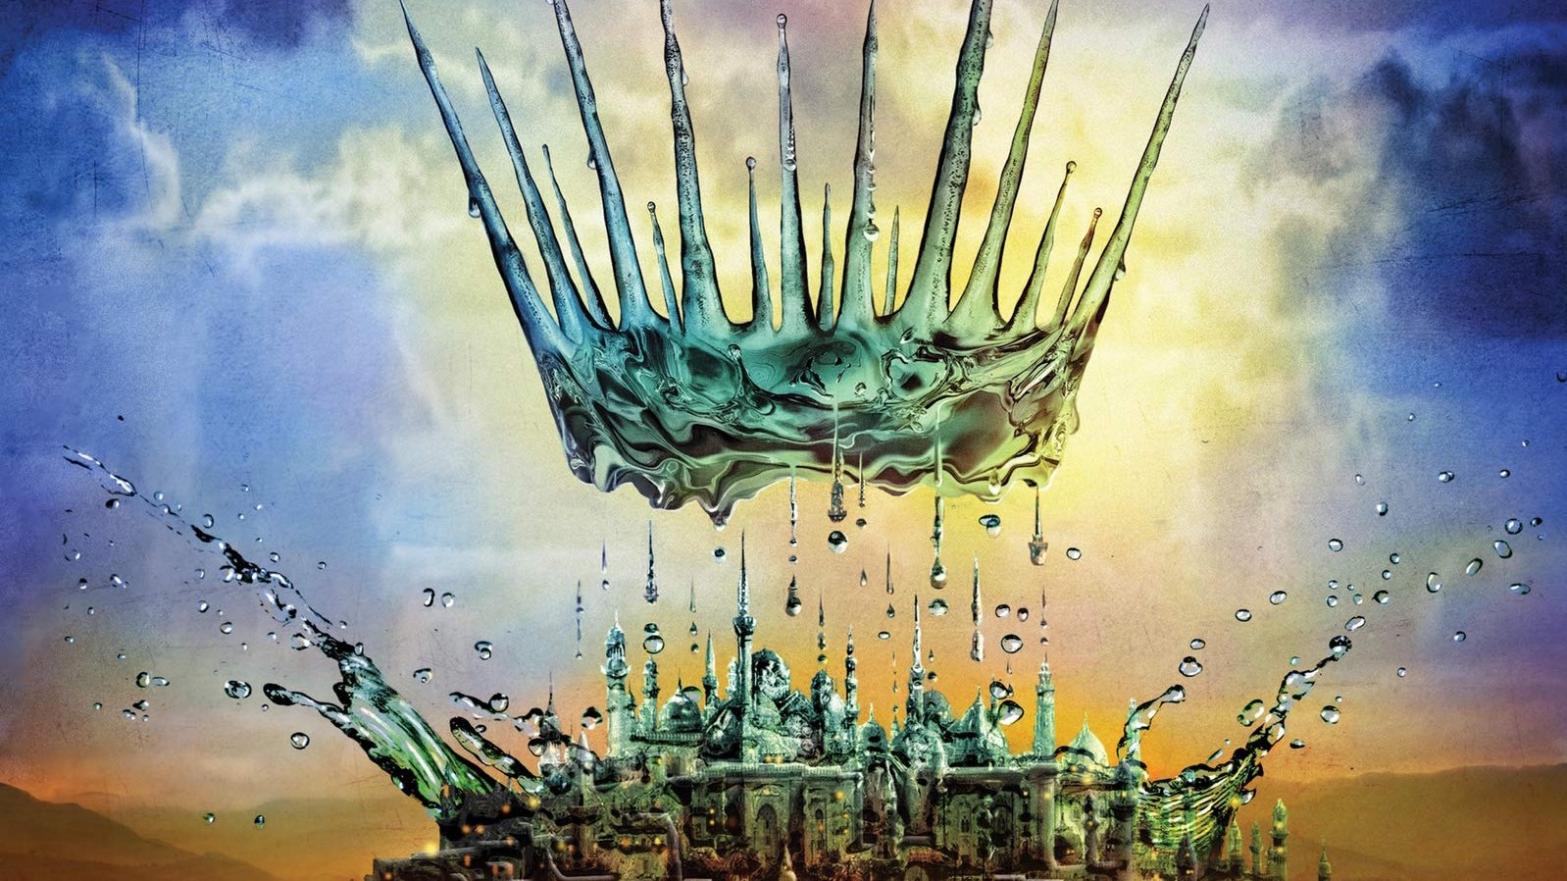 Crop of the cover art for Greta Kelly's upcoming fantasy debut, The Frozen Crown. (Image: Harper Voyager)